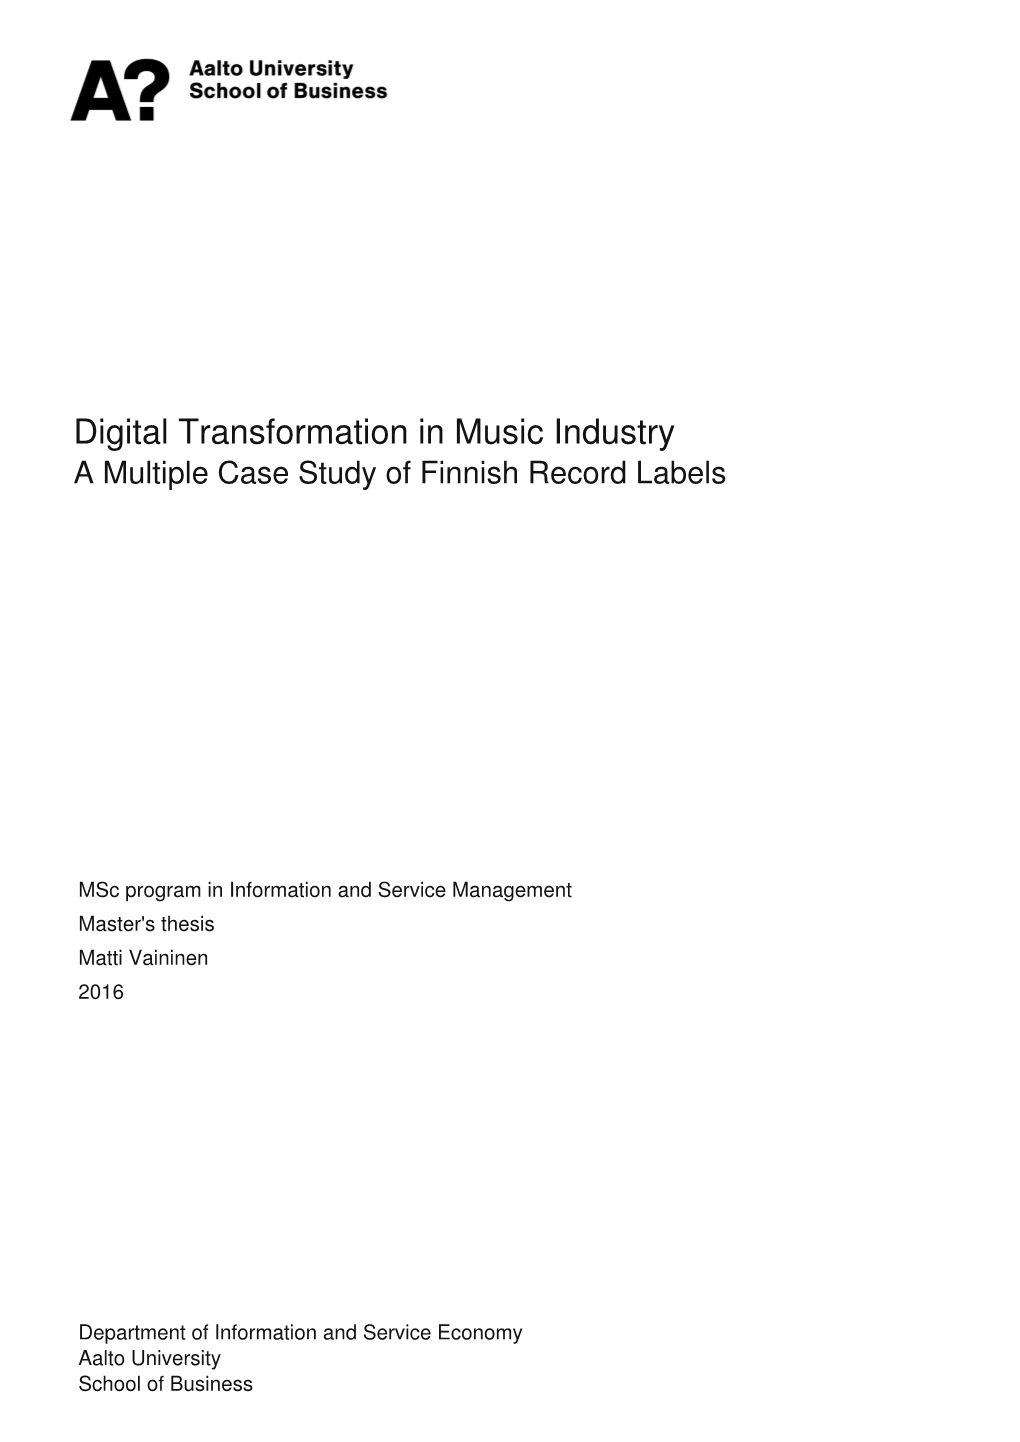 Digital Transformation in Music Industry a Multiple Case Study of Finnish Record Labels